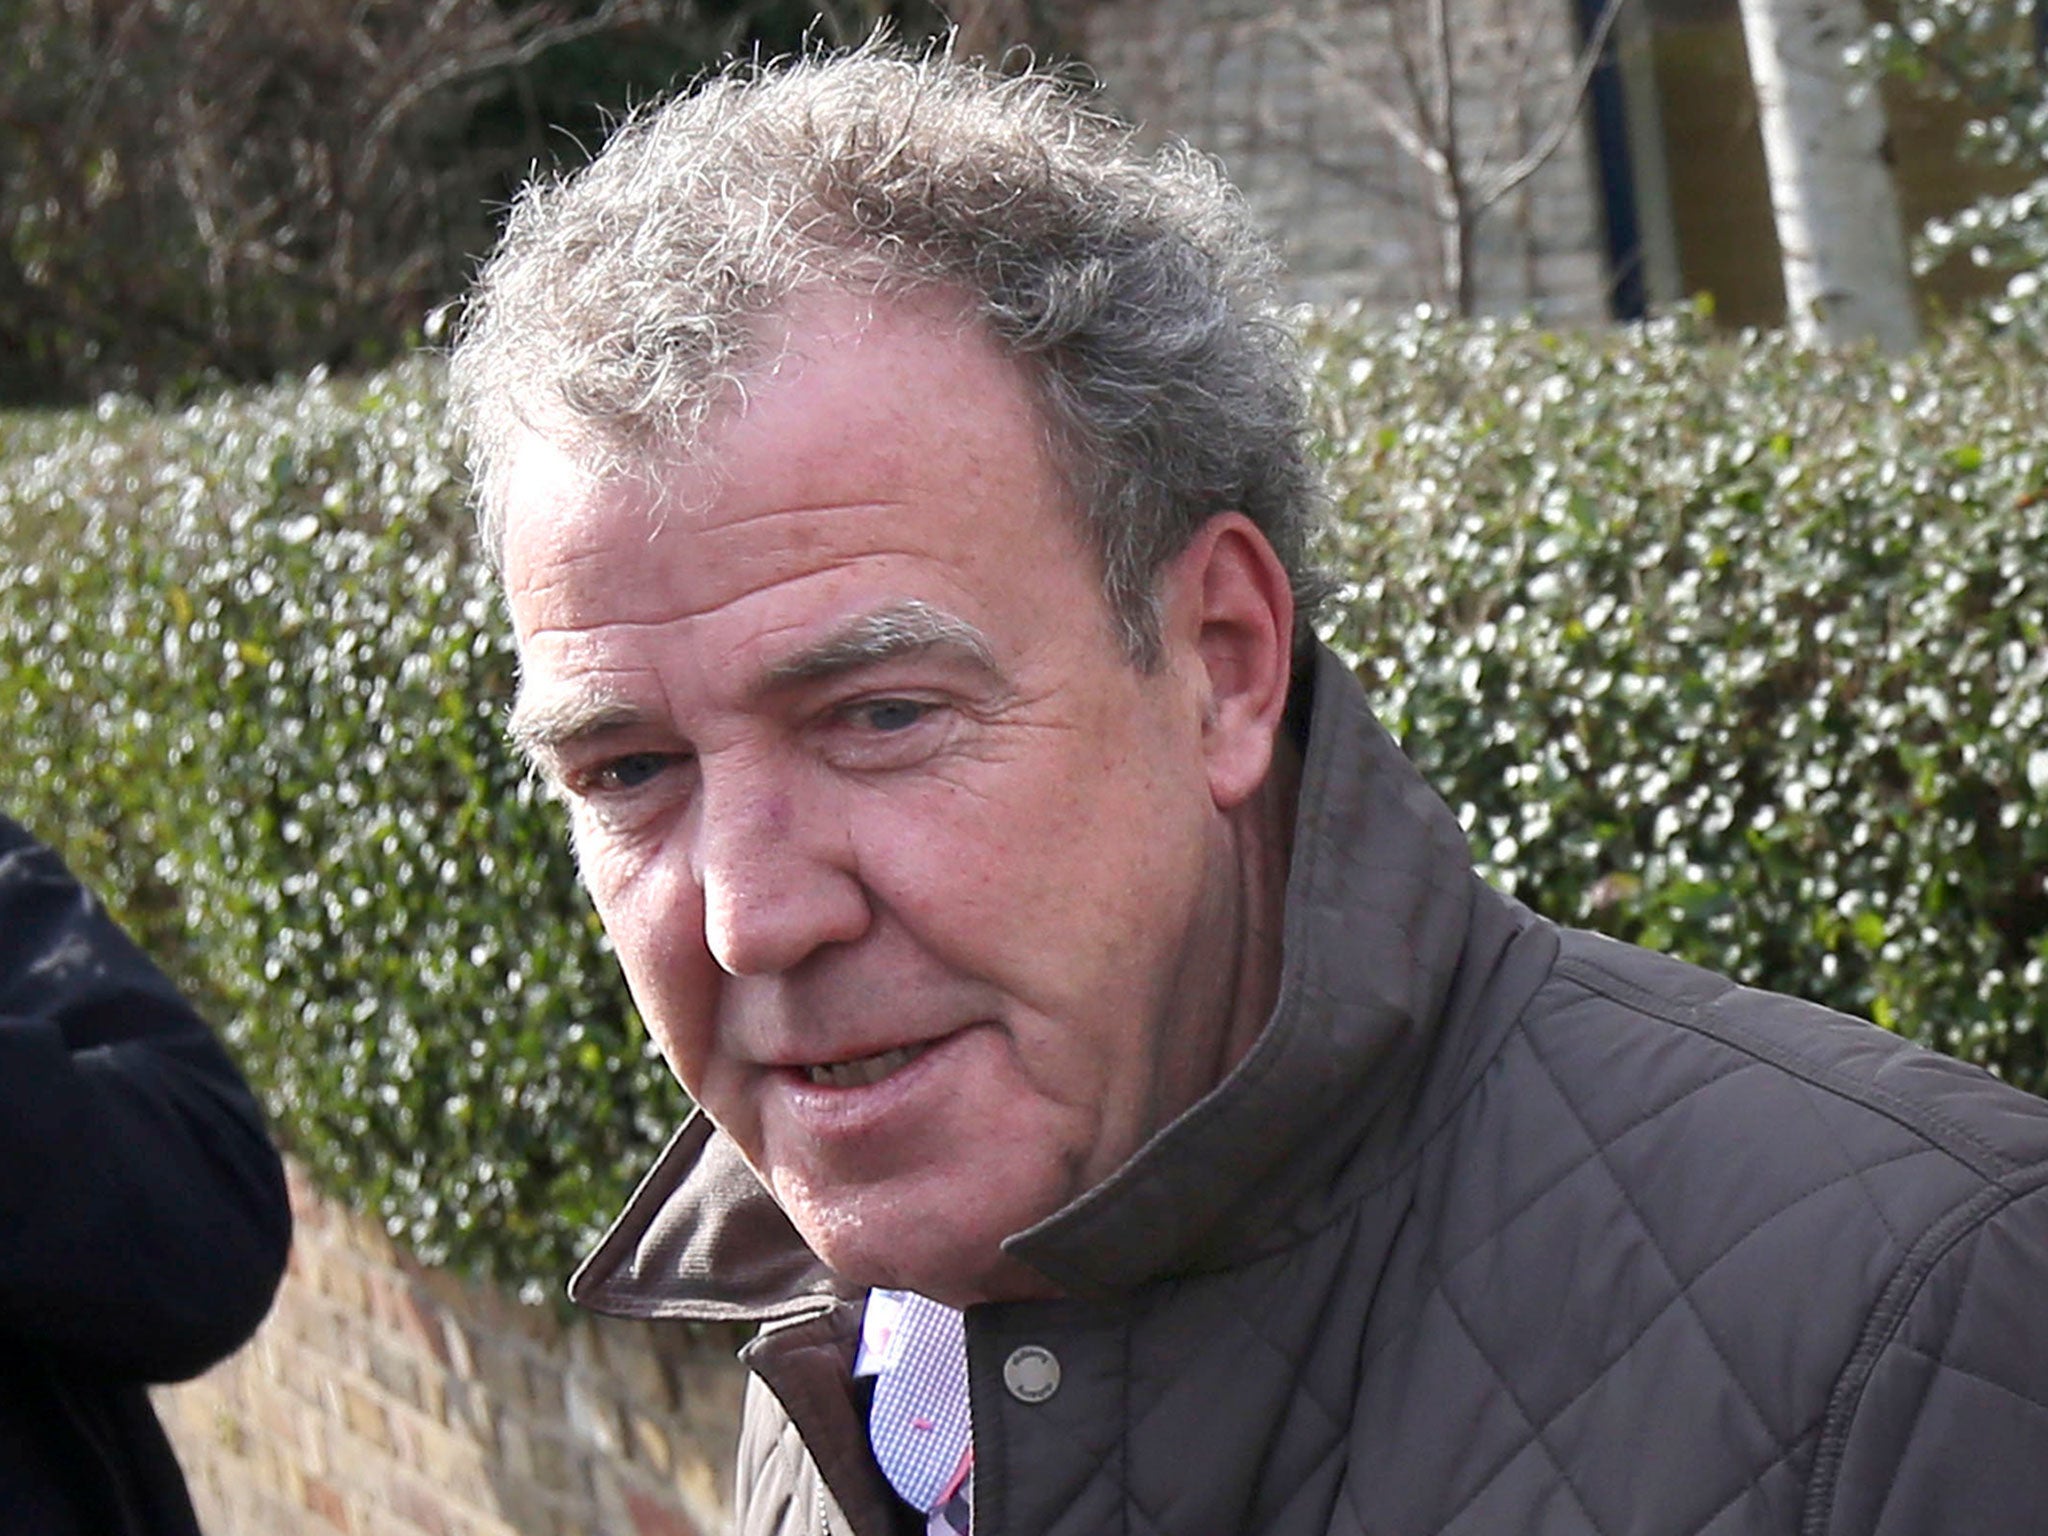 Jeremy Clarkson leaves his home in London